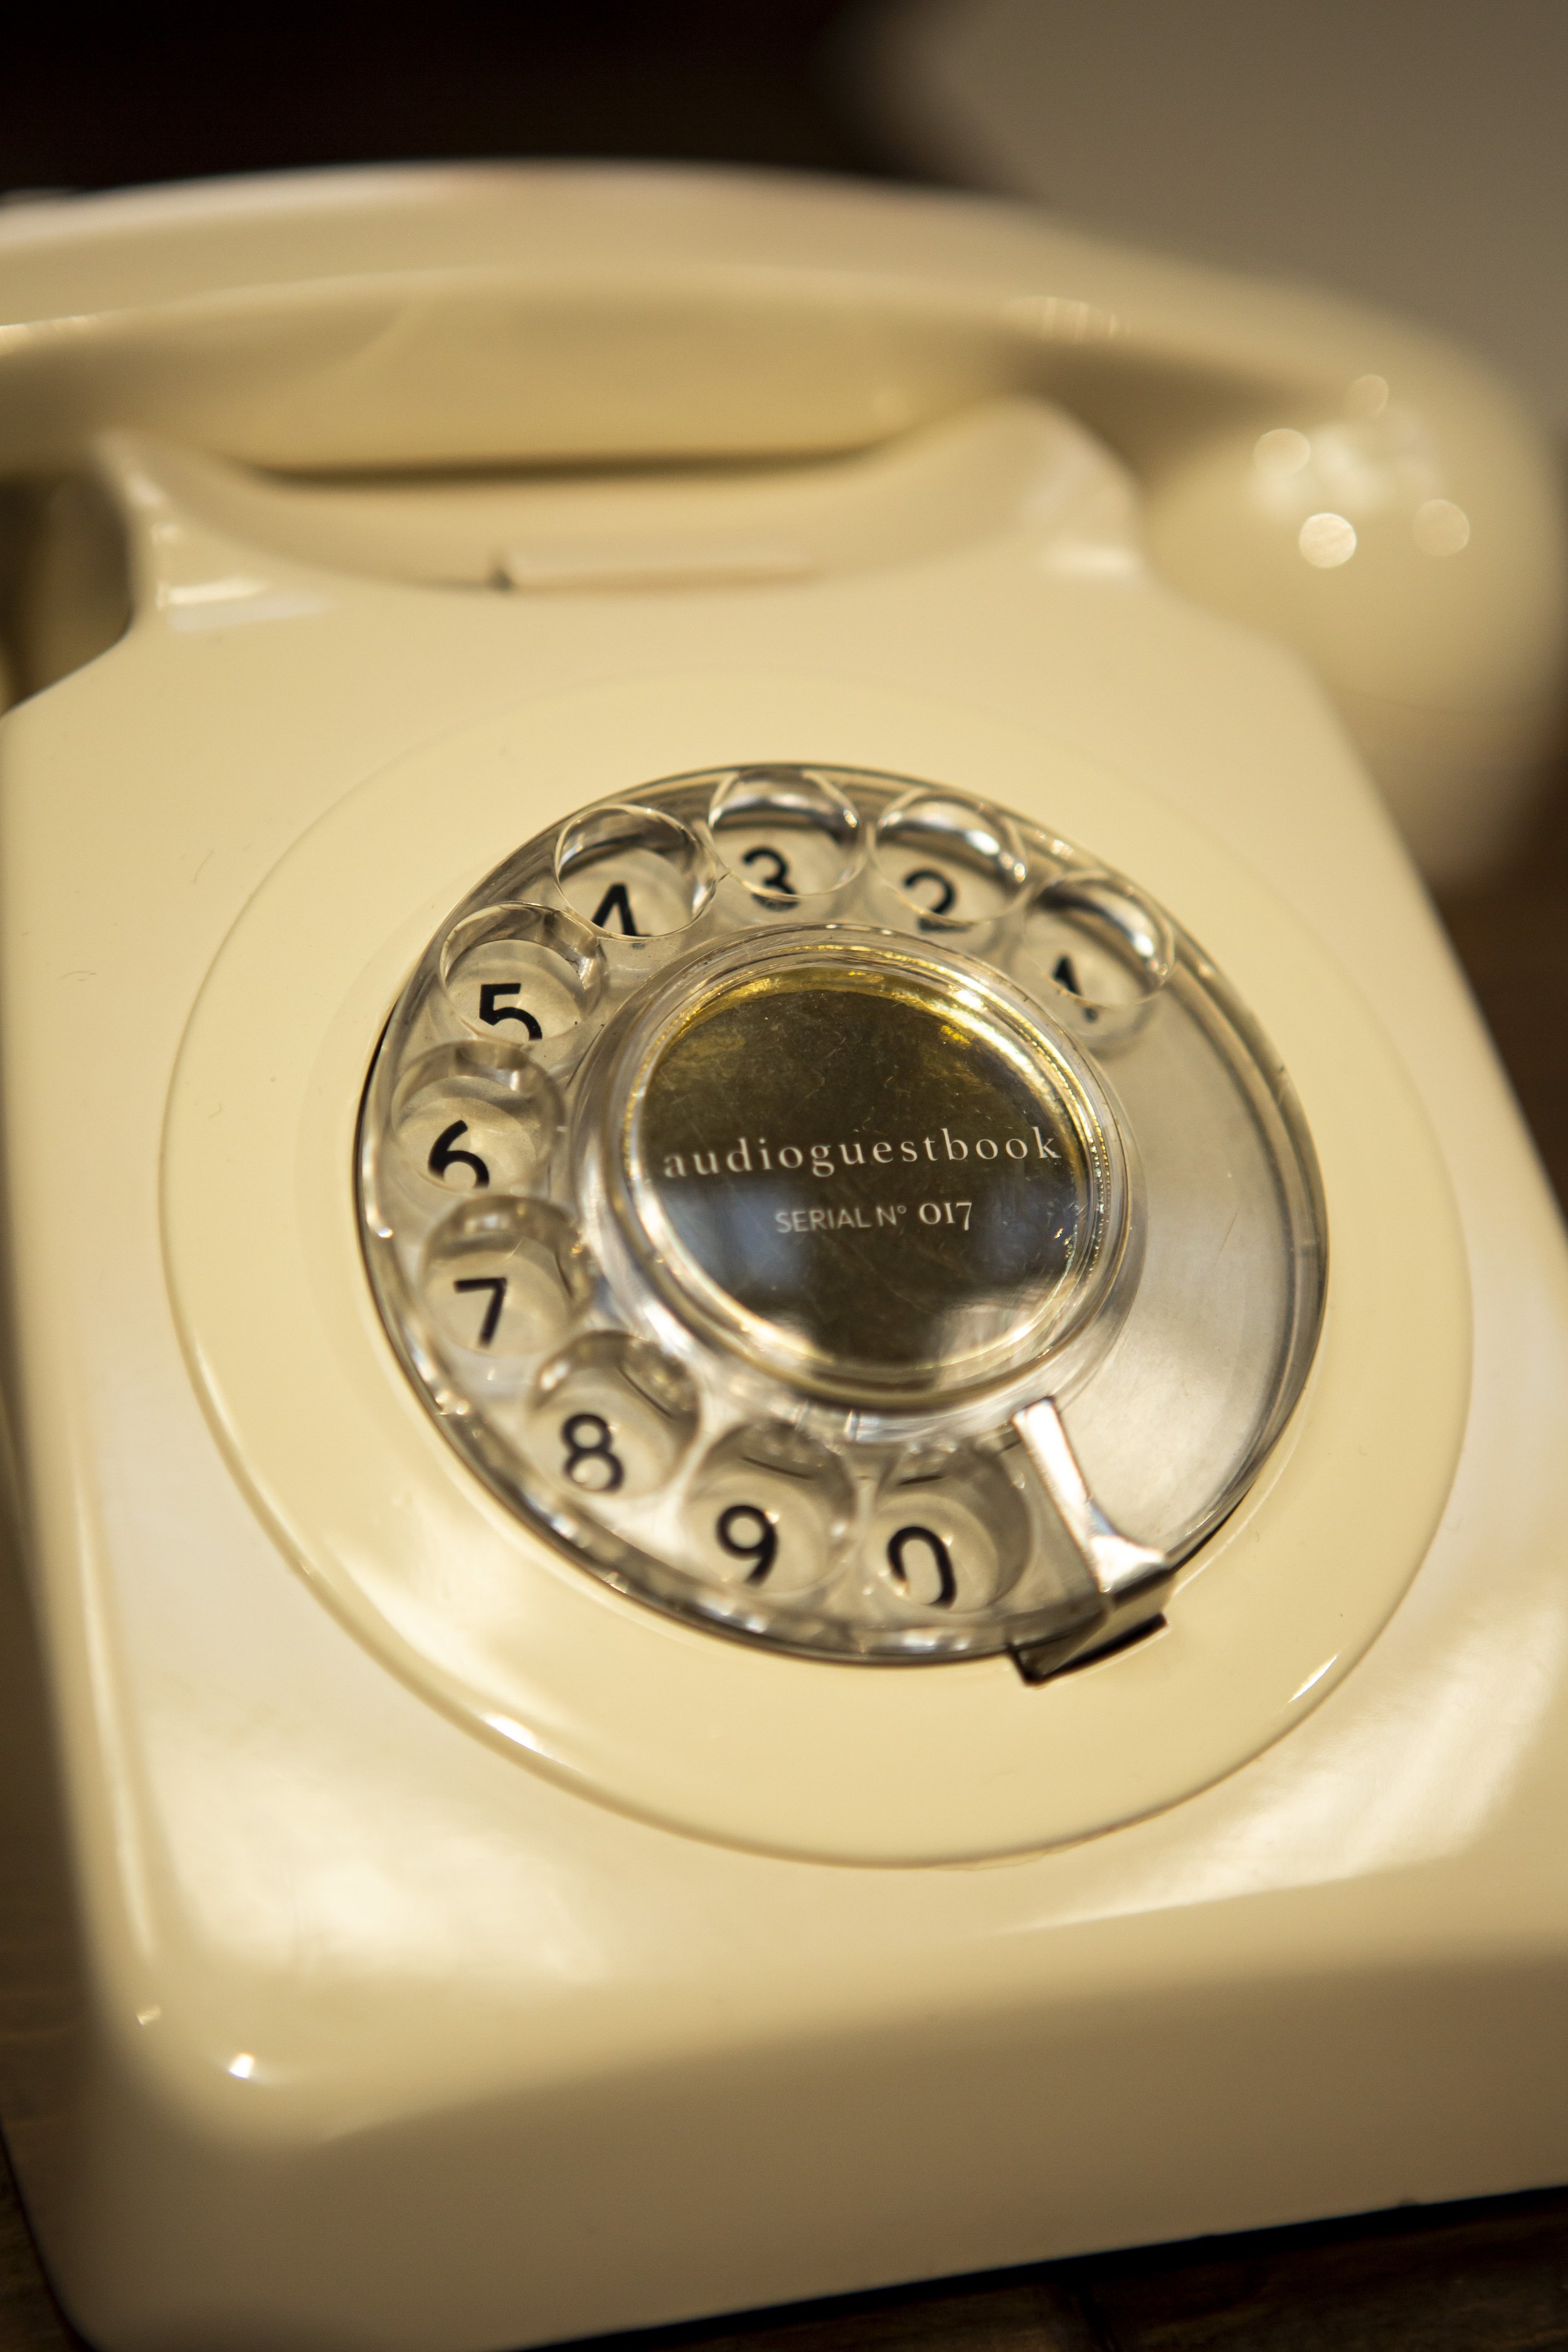  Cream, retro style audiogestbook telephone displayed ready to leave your wedding messages for the newlyweds. 